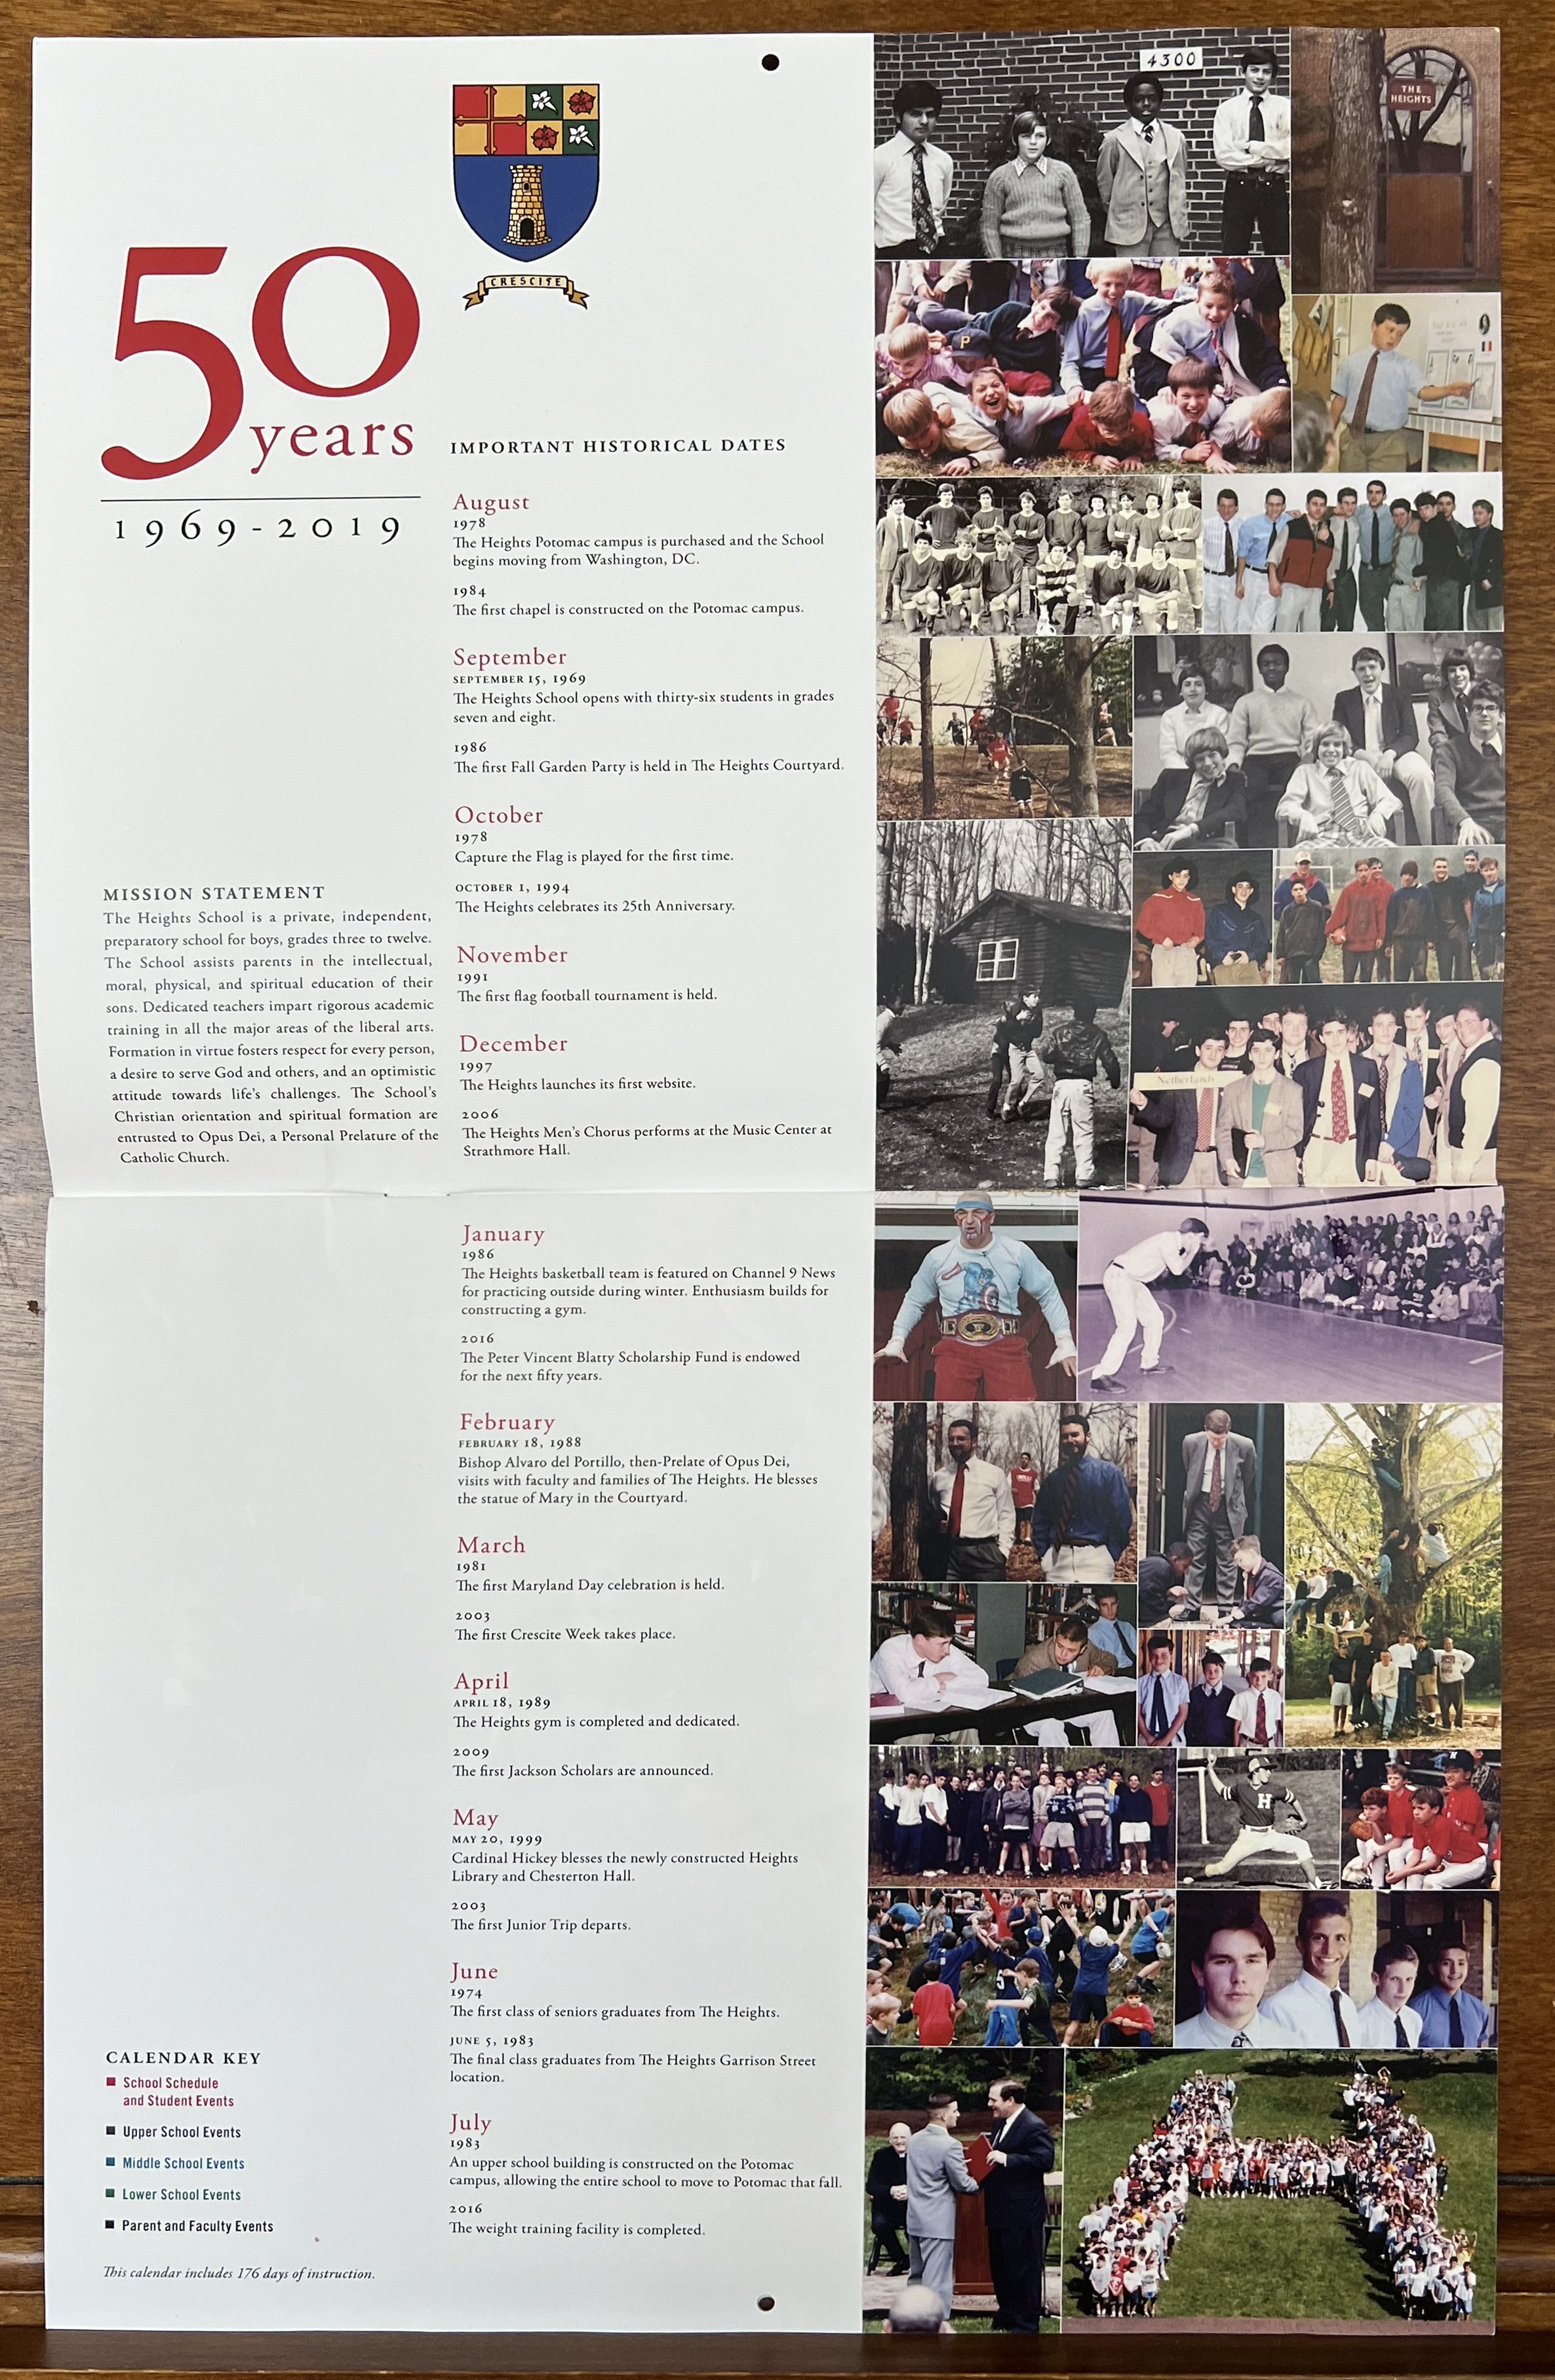 Vertical timeline of the School's history